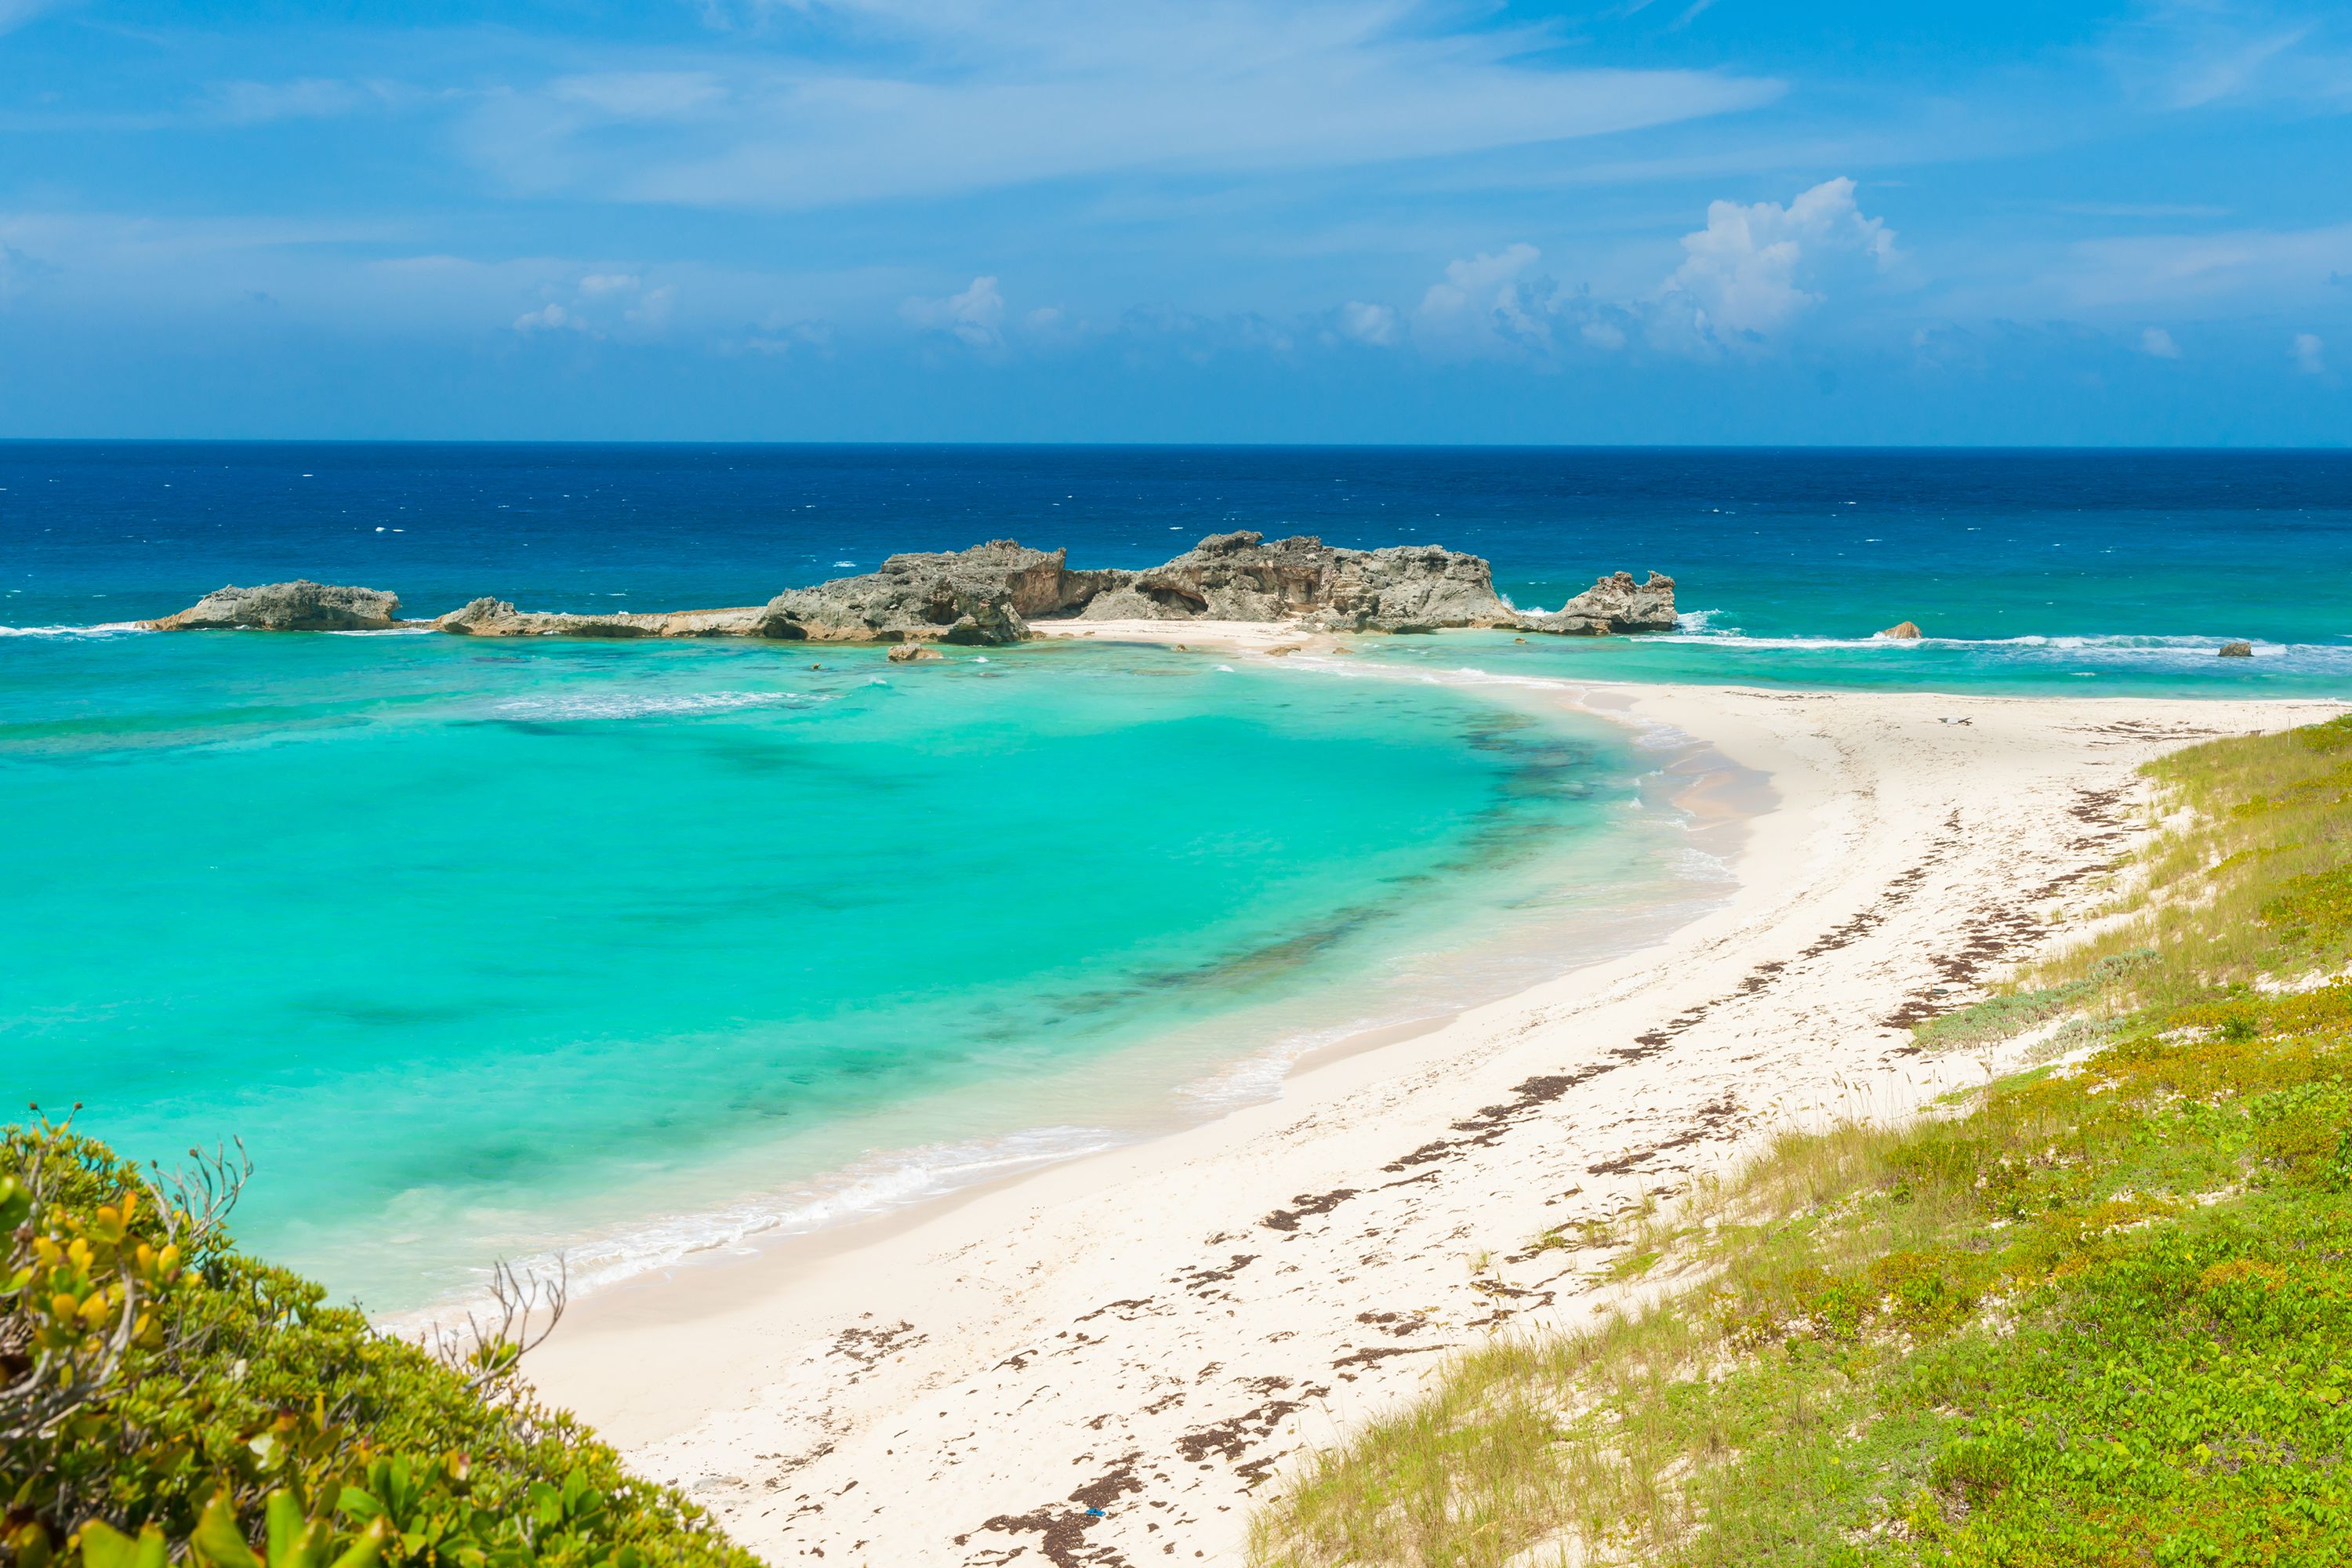 7 Reasons Why St. Barts Is My Favorite Caribbean Island